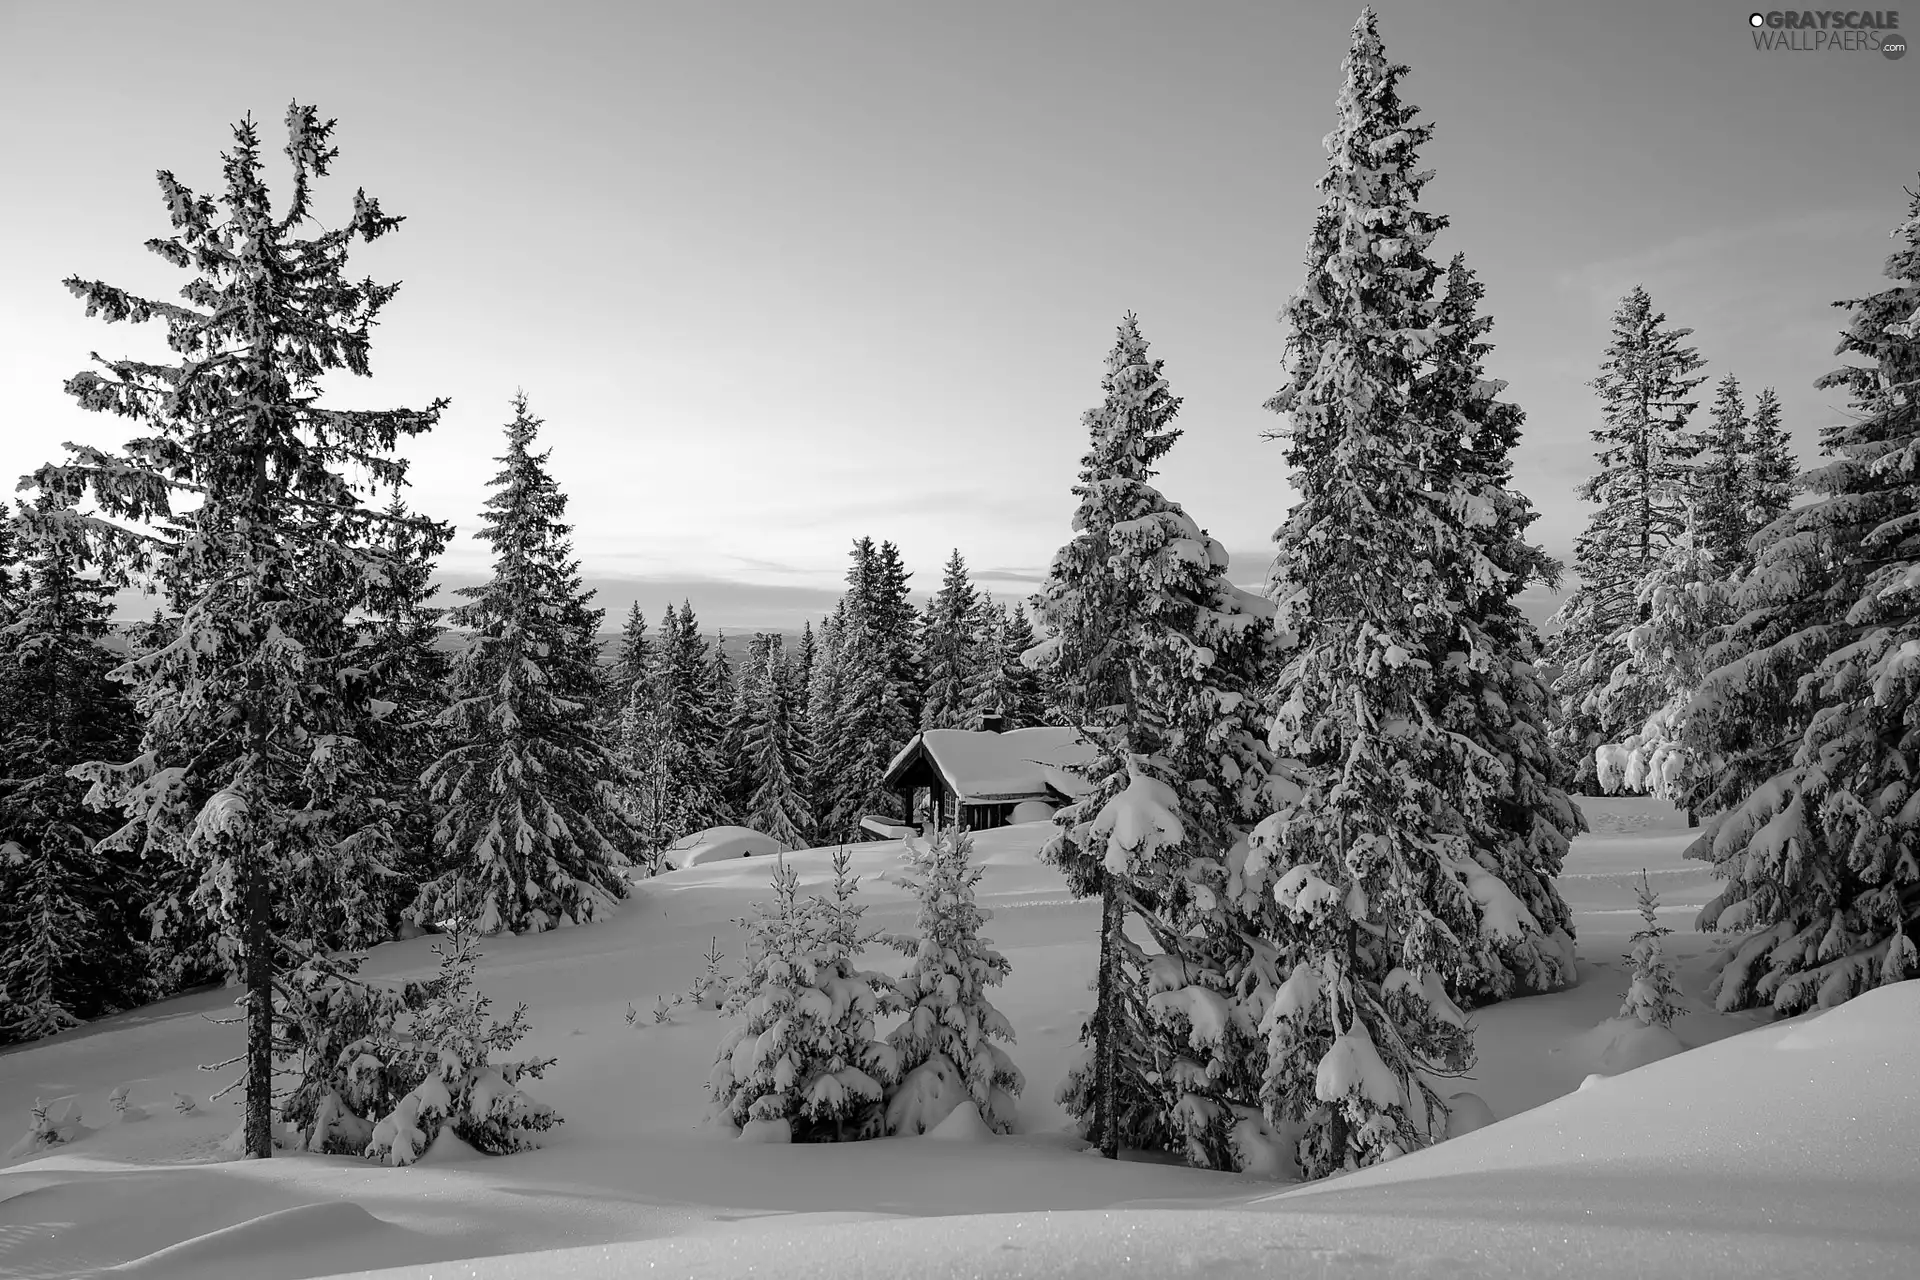 trees, viewes, winter, forest, Sunrise, Snowy, house, Mountains